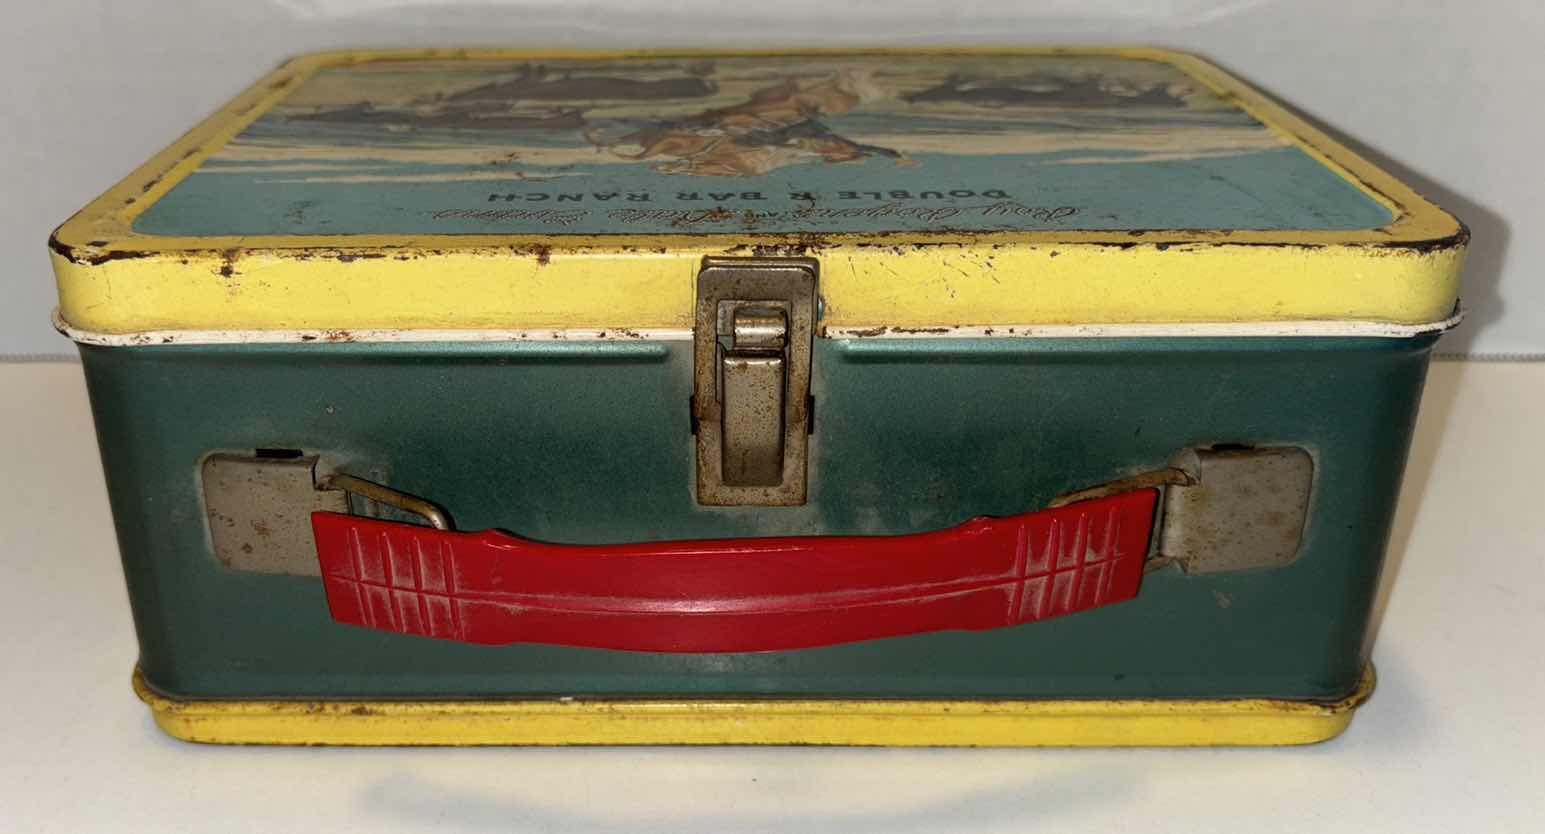 Photo 2 of ANTIQUE THE AMERICAN THERMOS BOTTLE CO 1955 “ROY ROGERS & DALE EVANS DOUBLE BAR RANCH” TIN LUNCH BOX